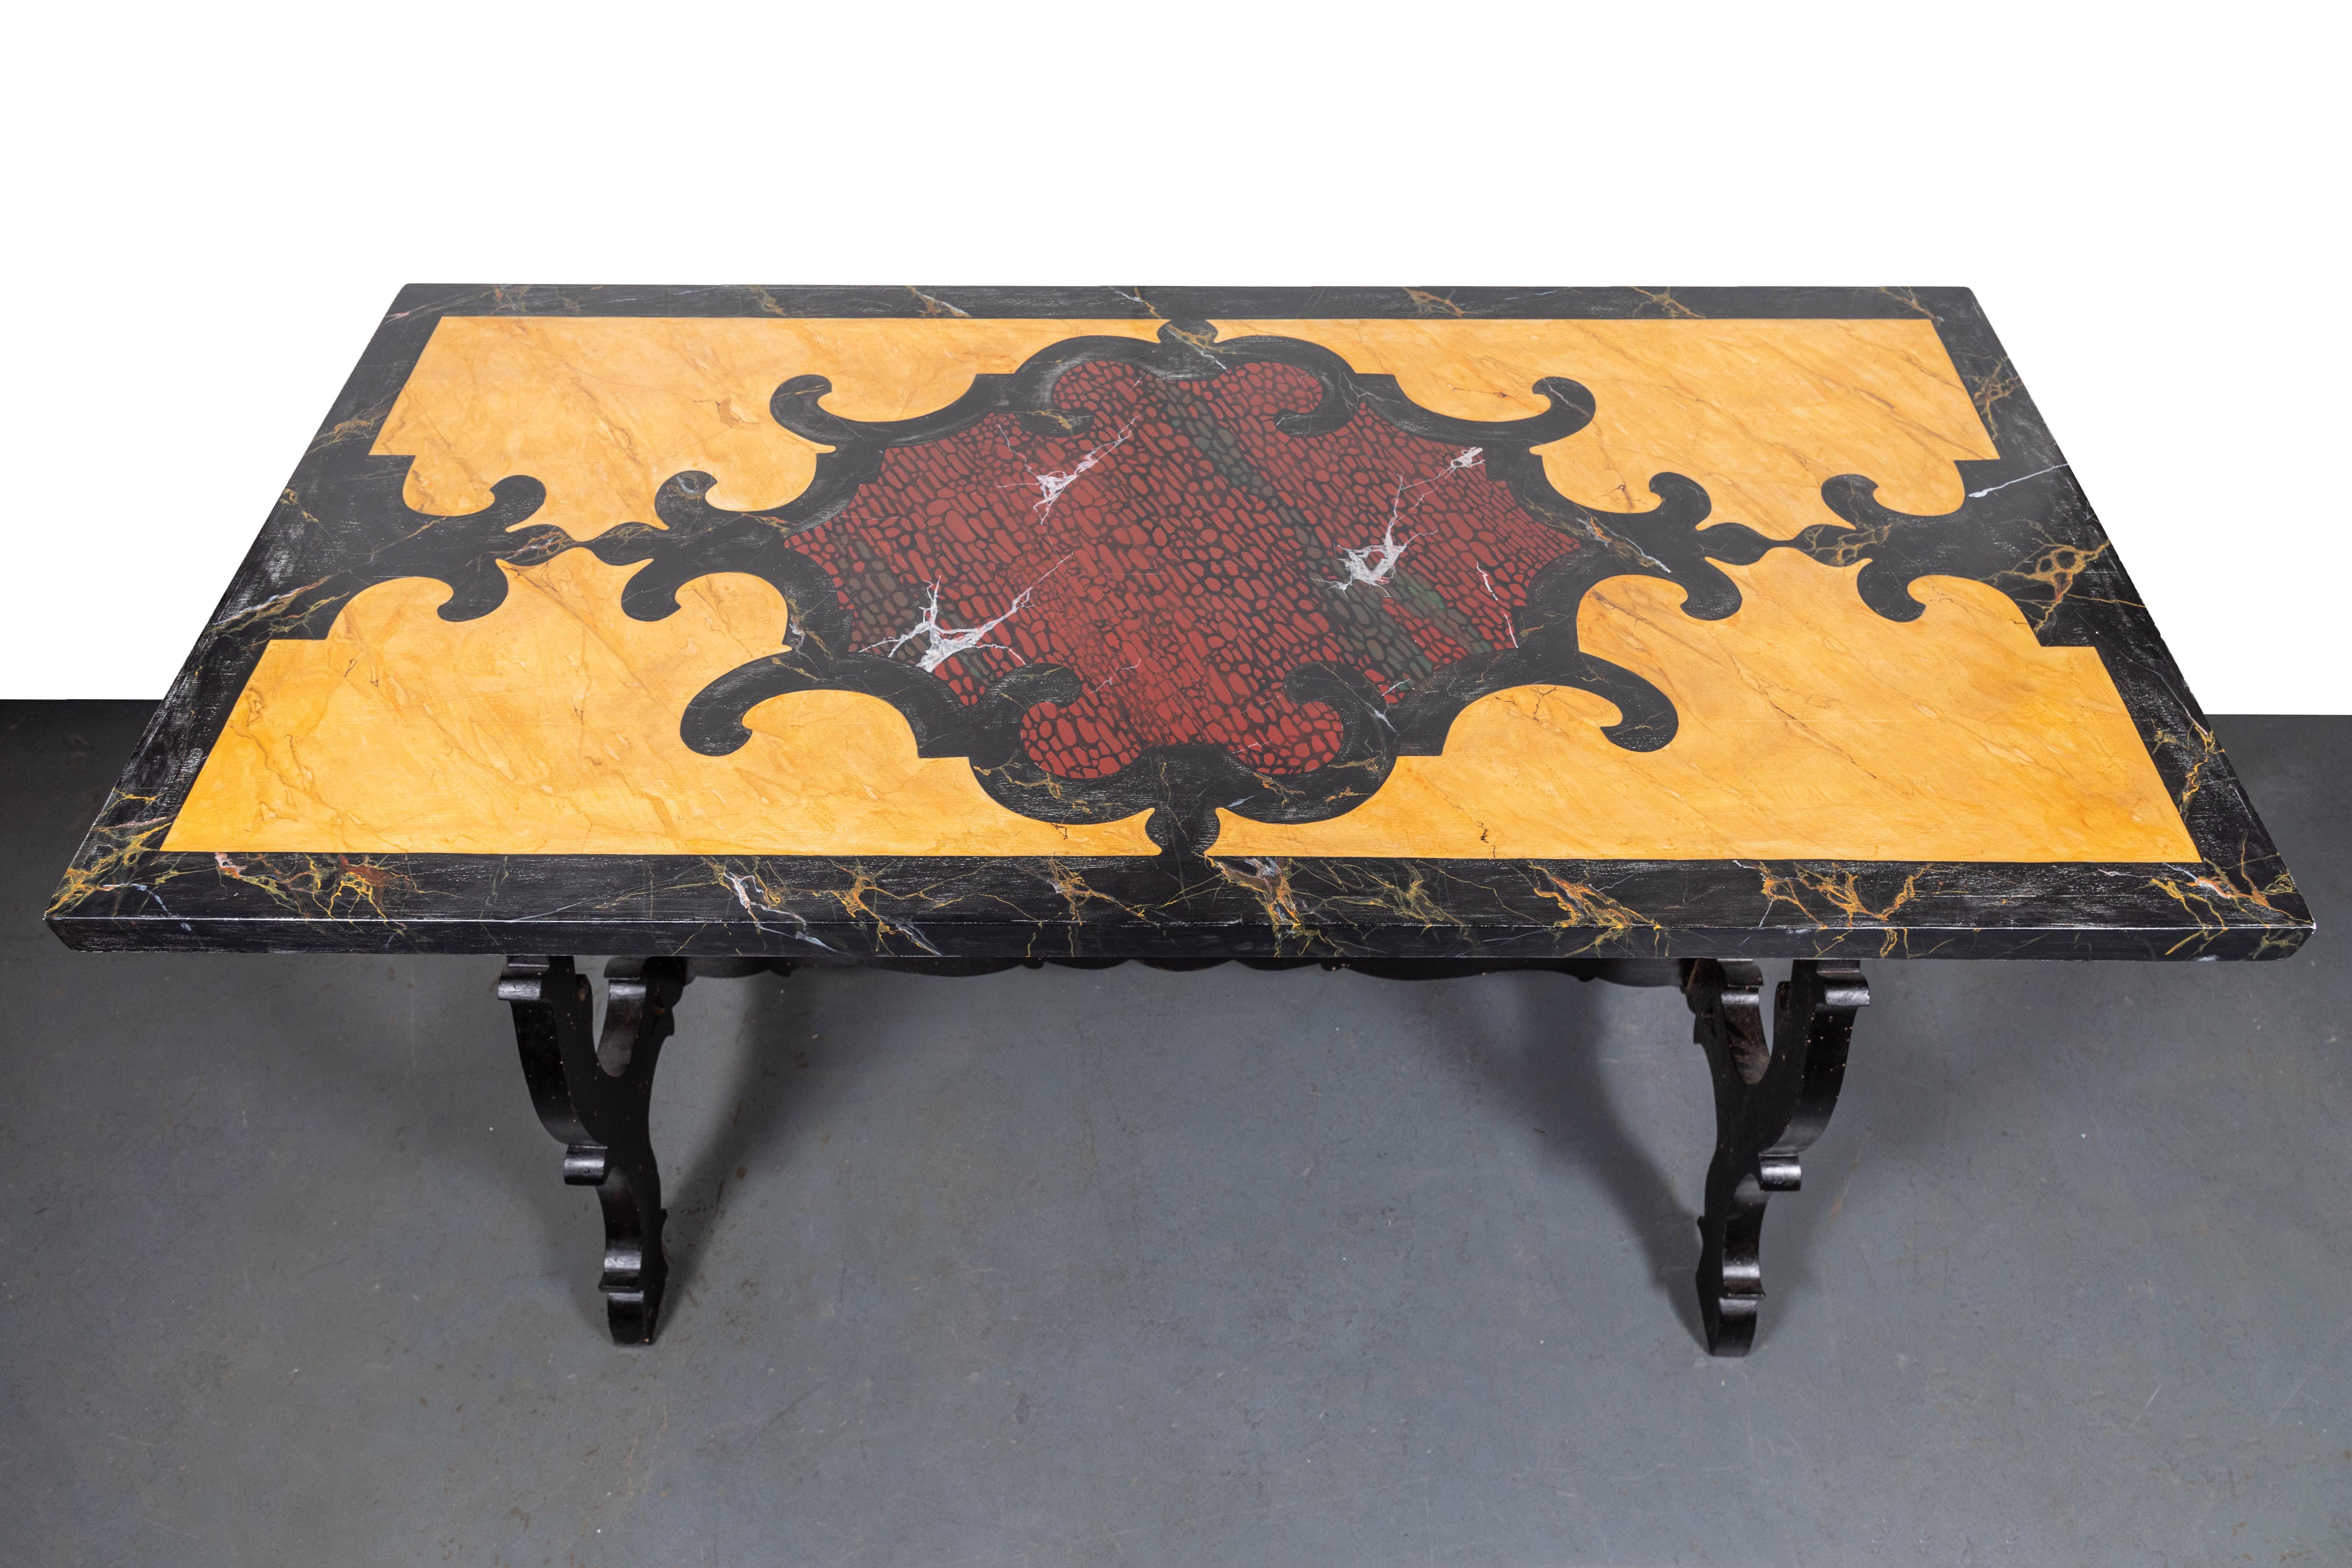 Turn-of-the-century, hand carved, Renaissance Revival, Italian table with vibrant, hand painted, faux marble top above richly carved legs and trestle.